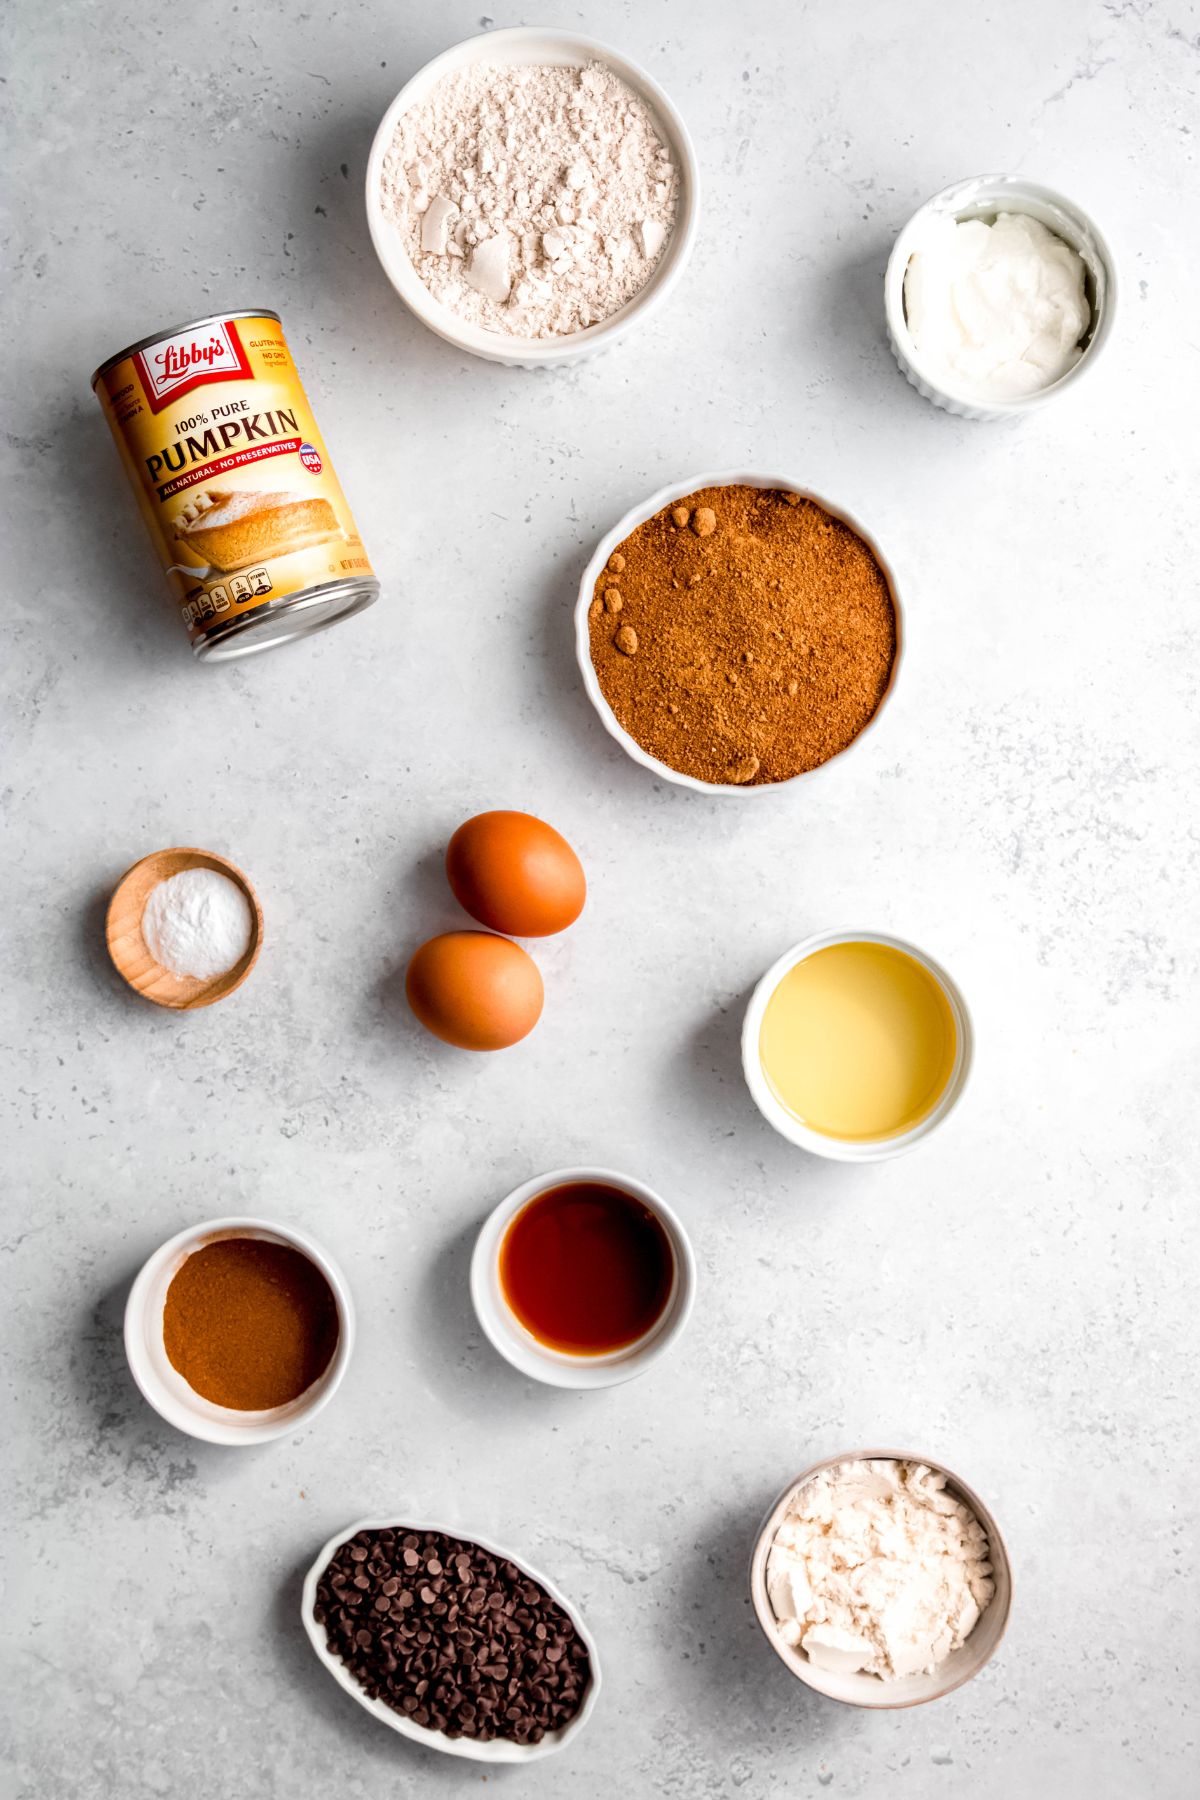 Ingredients needed to make pumpkin protein muffins measured out into bowls on a white table.